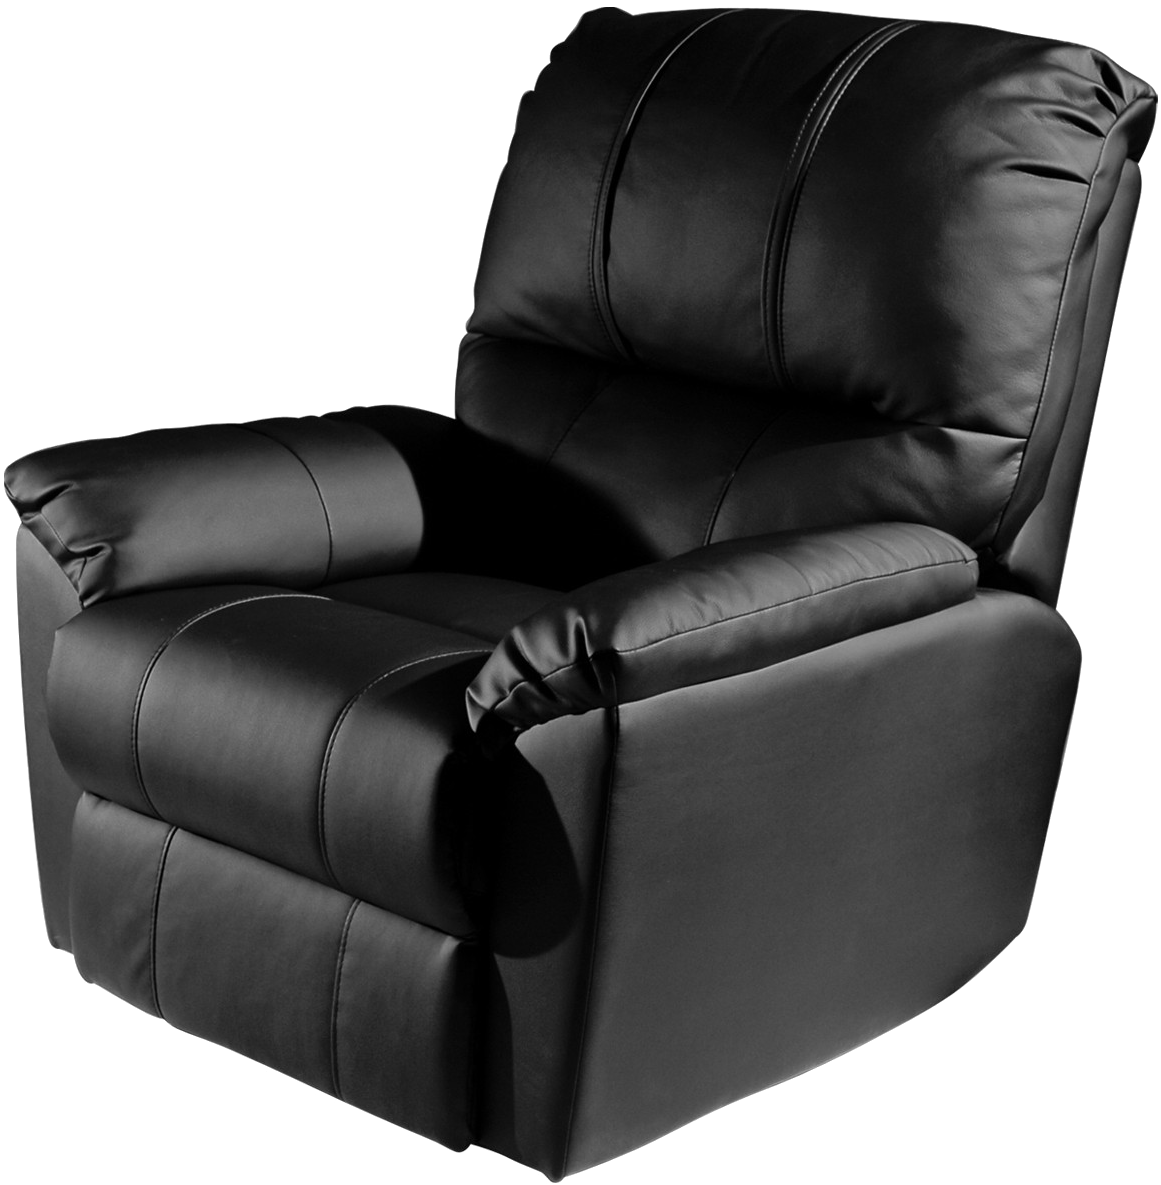 Recliner Png Background Image - Leather Chair Recliner Png (1300x1300)